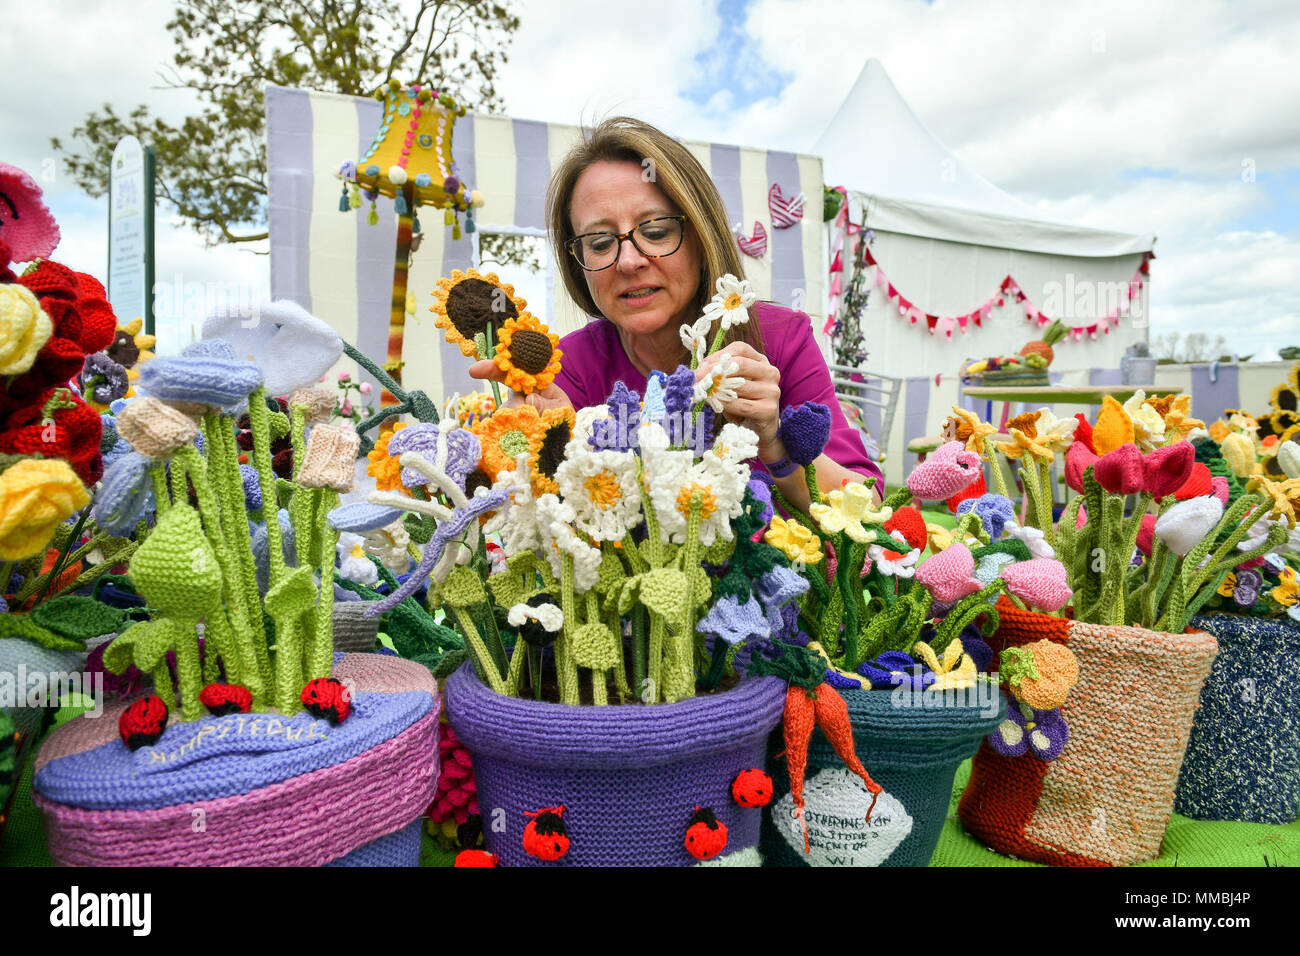 Clare Young arranges a pot of various knitted flowers in the 'Work of Heart Garden', the world's first knitted garden, during the RHS Malvern Spring Festival at the Three Counties Showground in Malvern, Worcestershire, created by Clare Young as a tribute to her husband Ken and the hospice that cared for him. Stock Photo